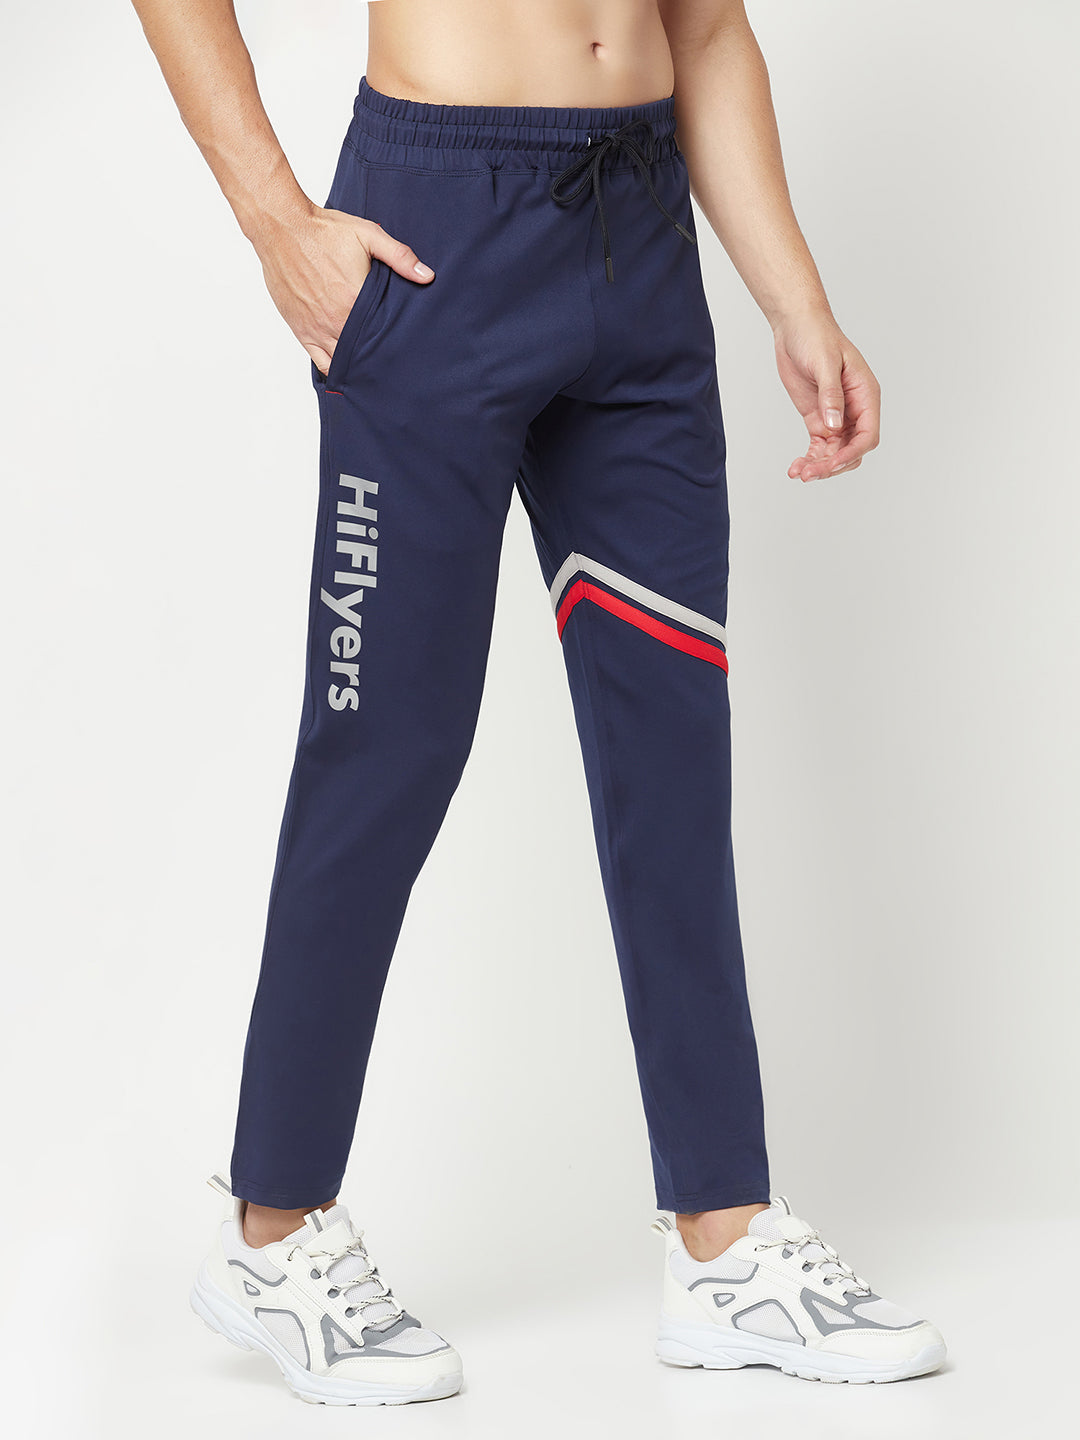 Buy Multicoloured Track Pants for Boys by My Sweet Angel Online | Ajio.com